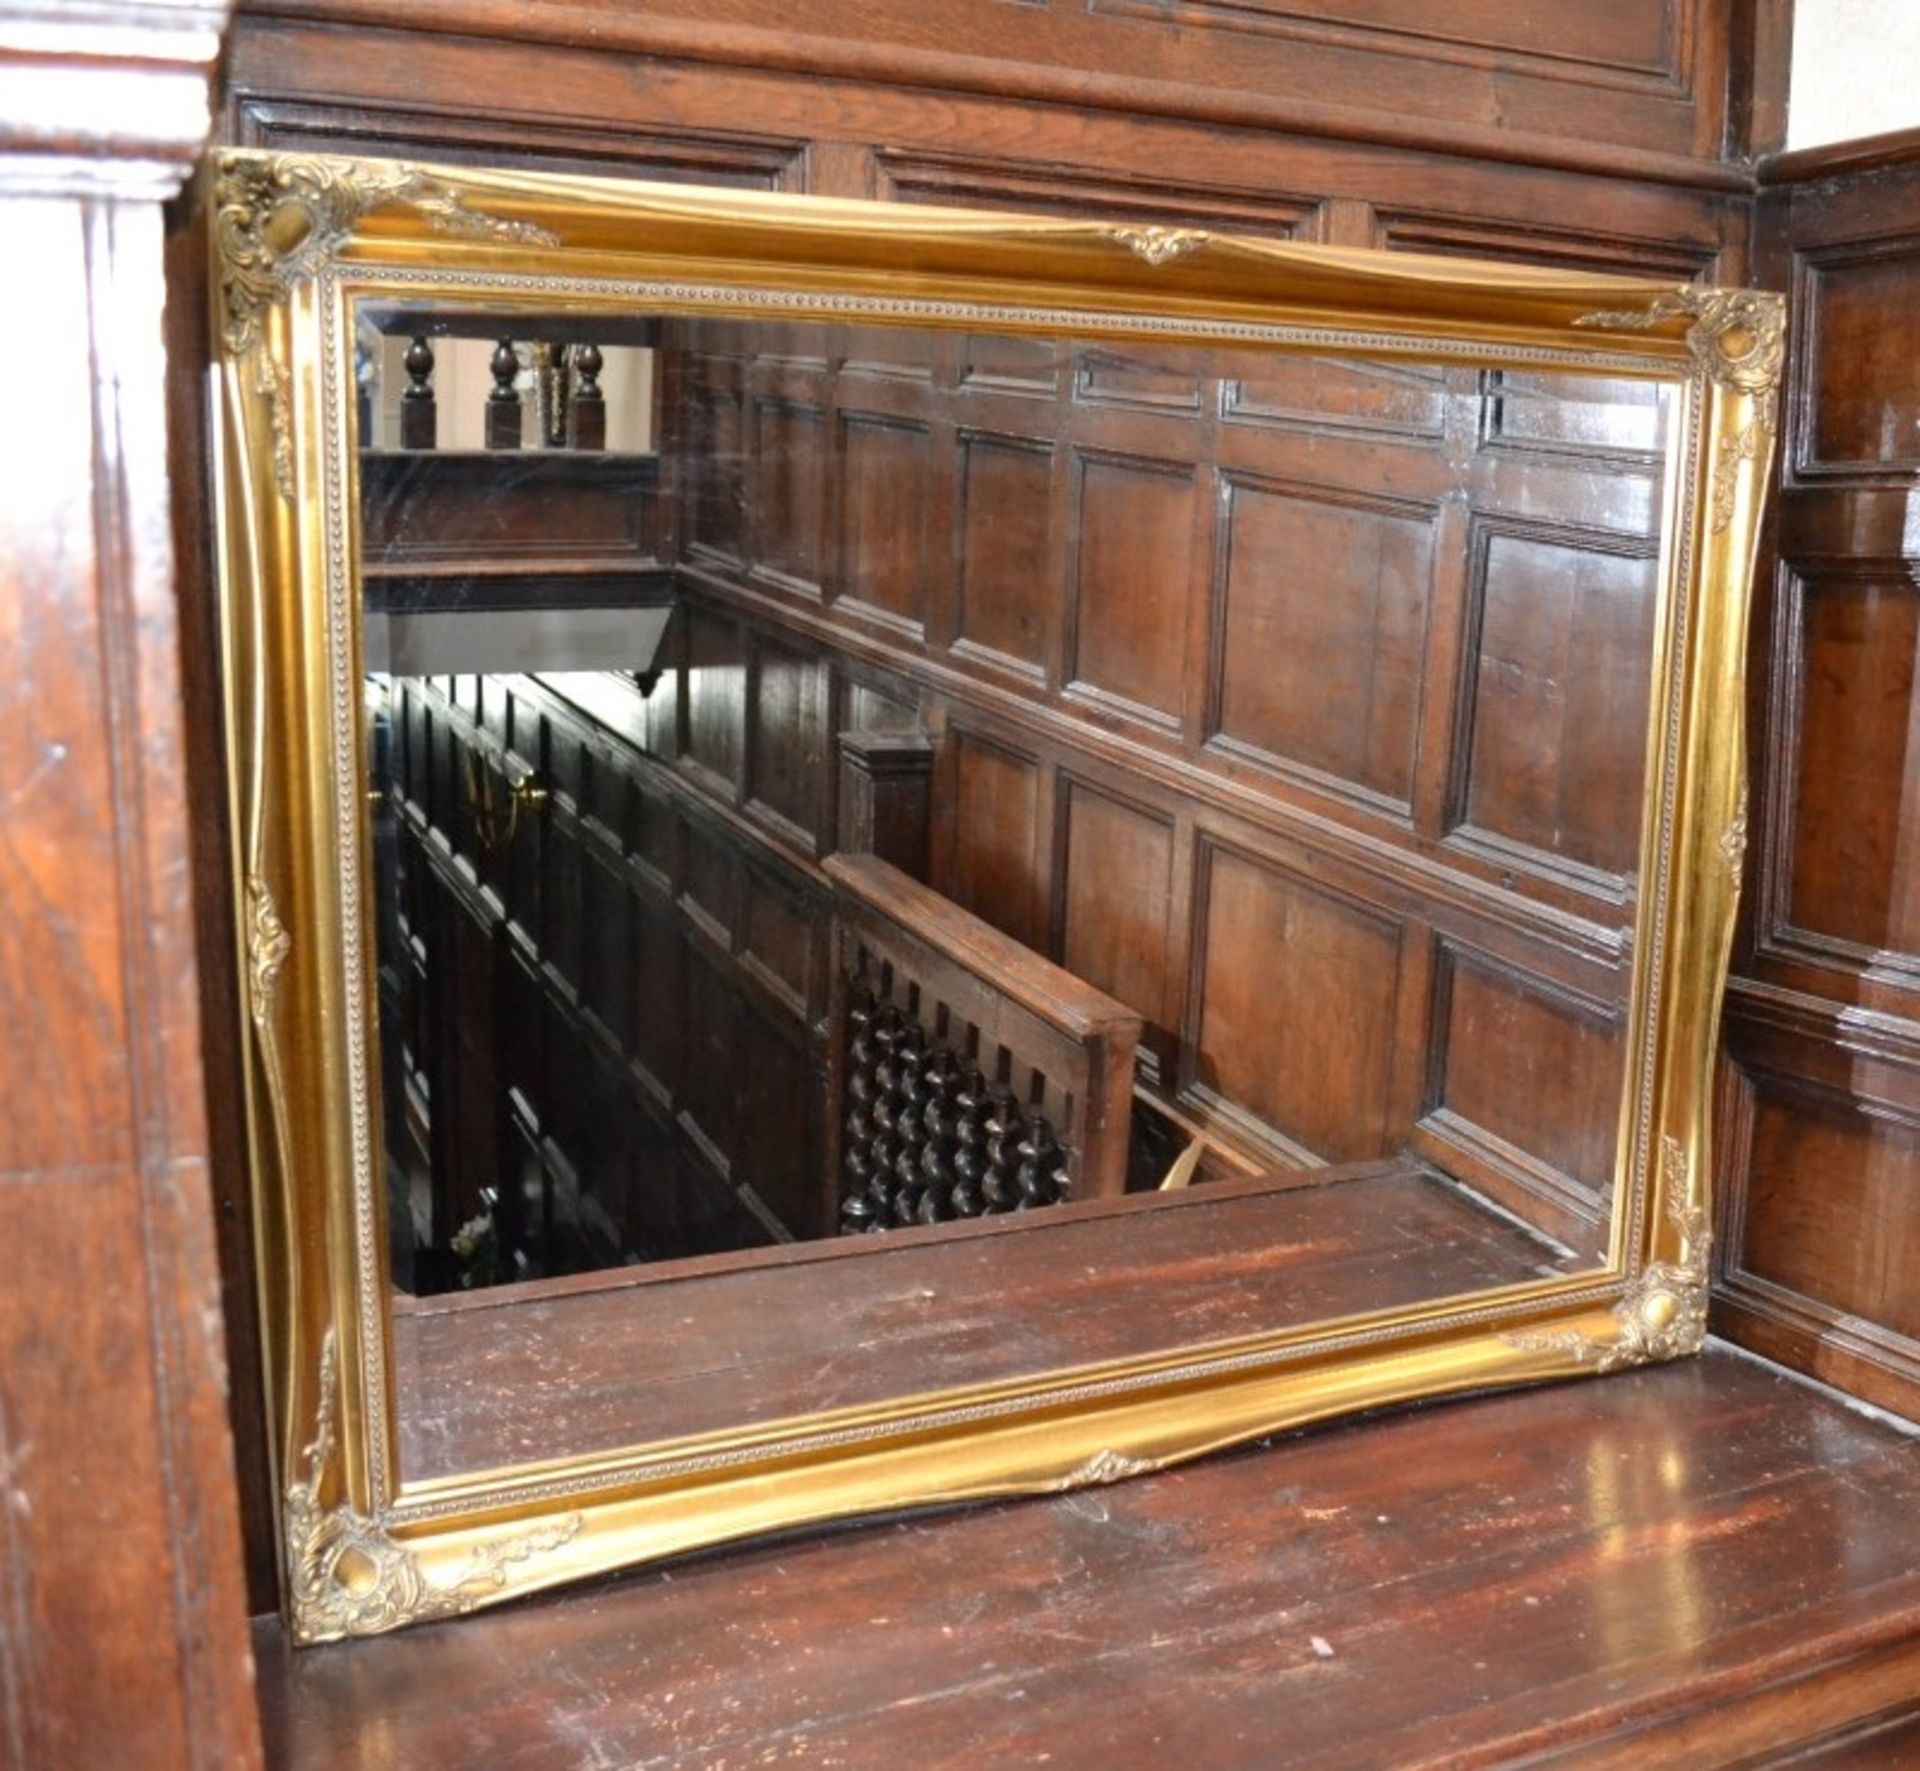 1 x Very Large Gilt Framed Mirror - From A Grade II Listed Hall In Great Condition - Dimensions: